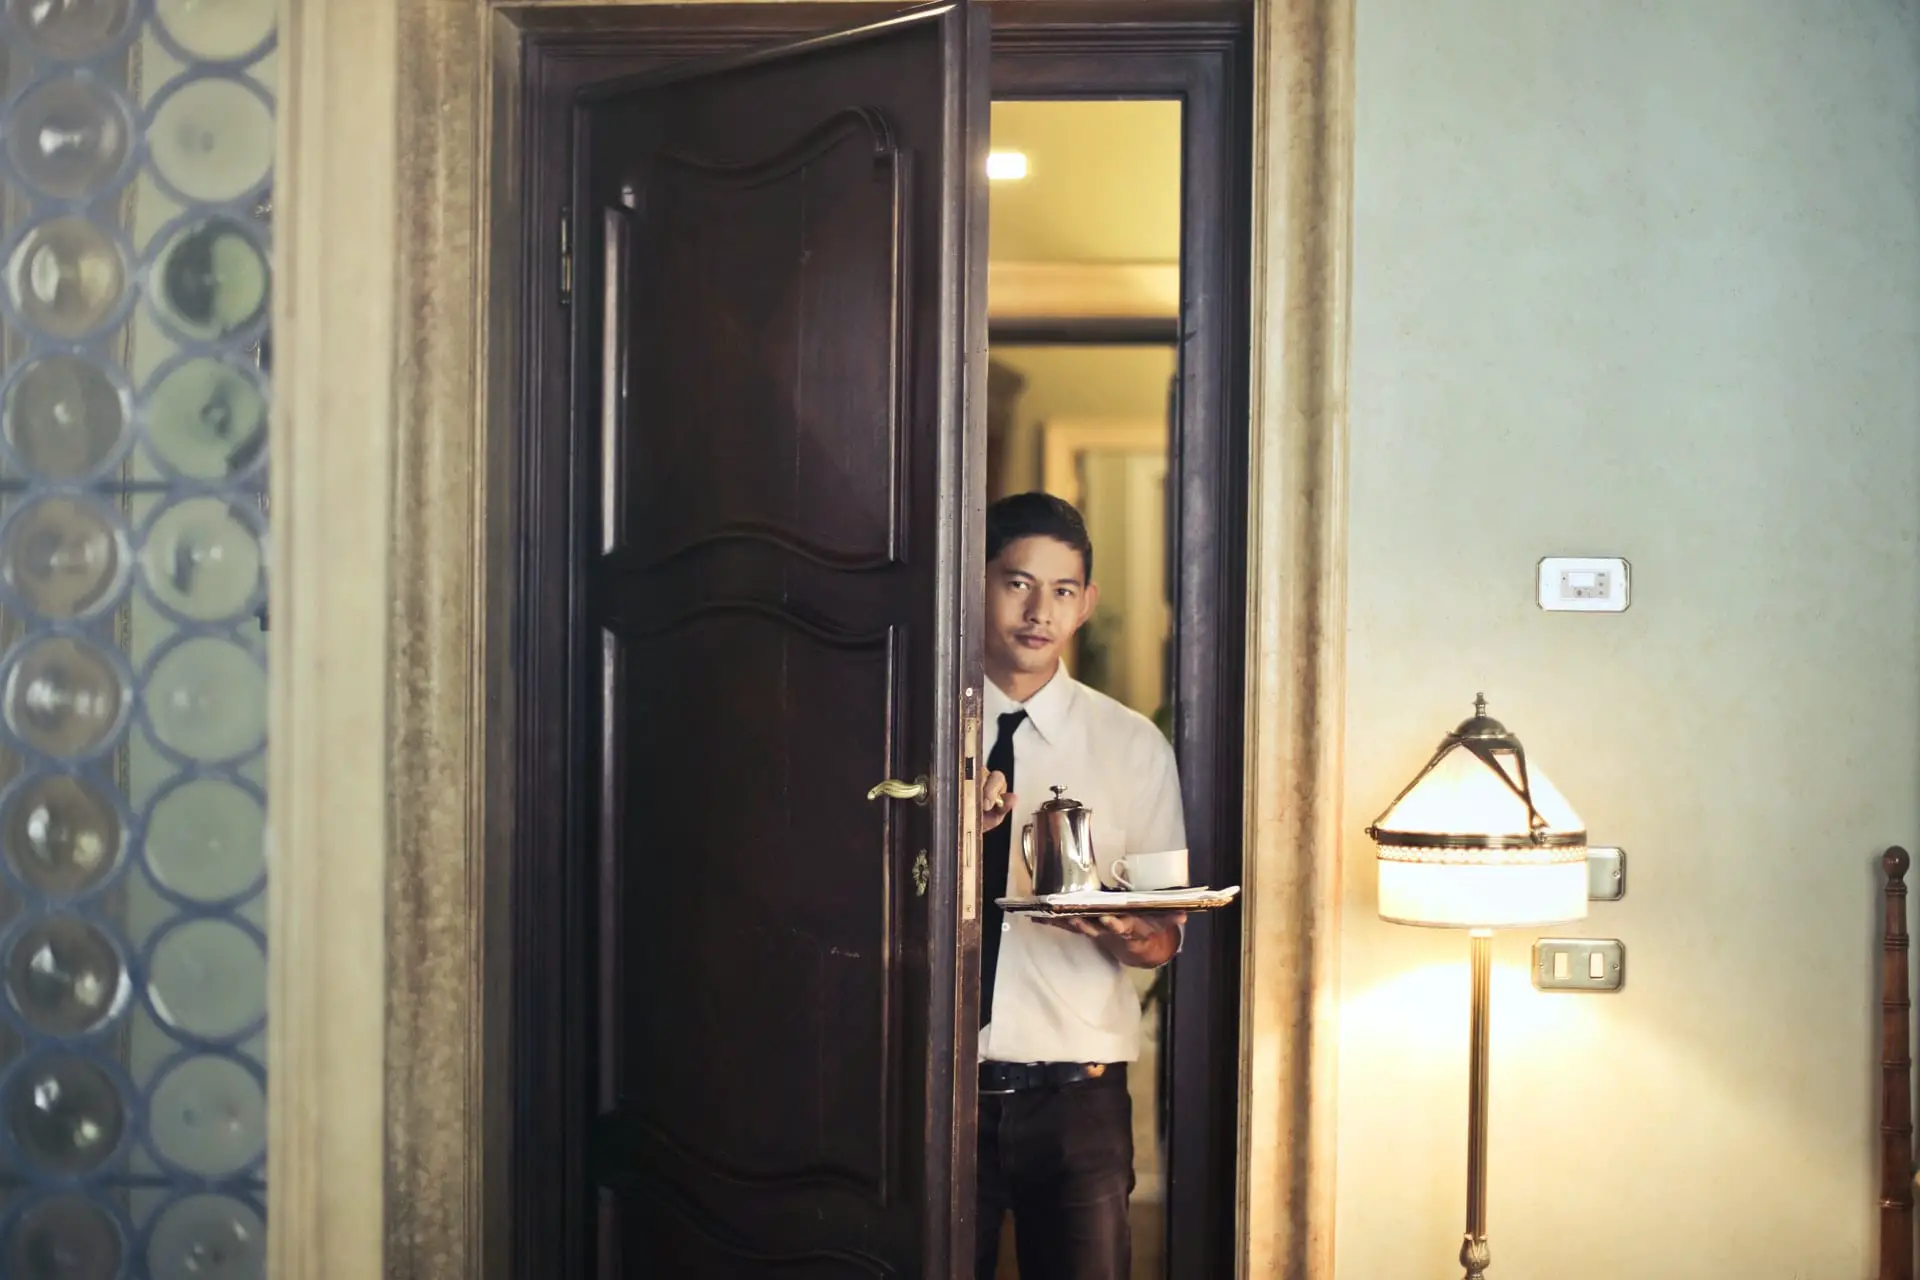 Can hotel staff enter the room without permission?